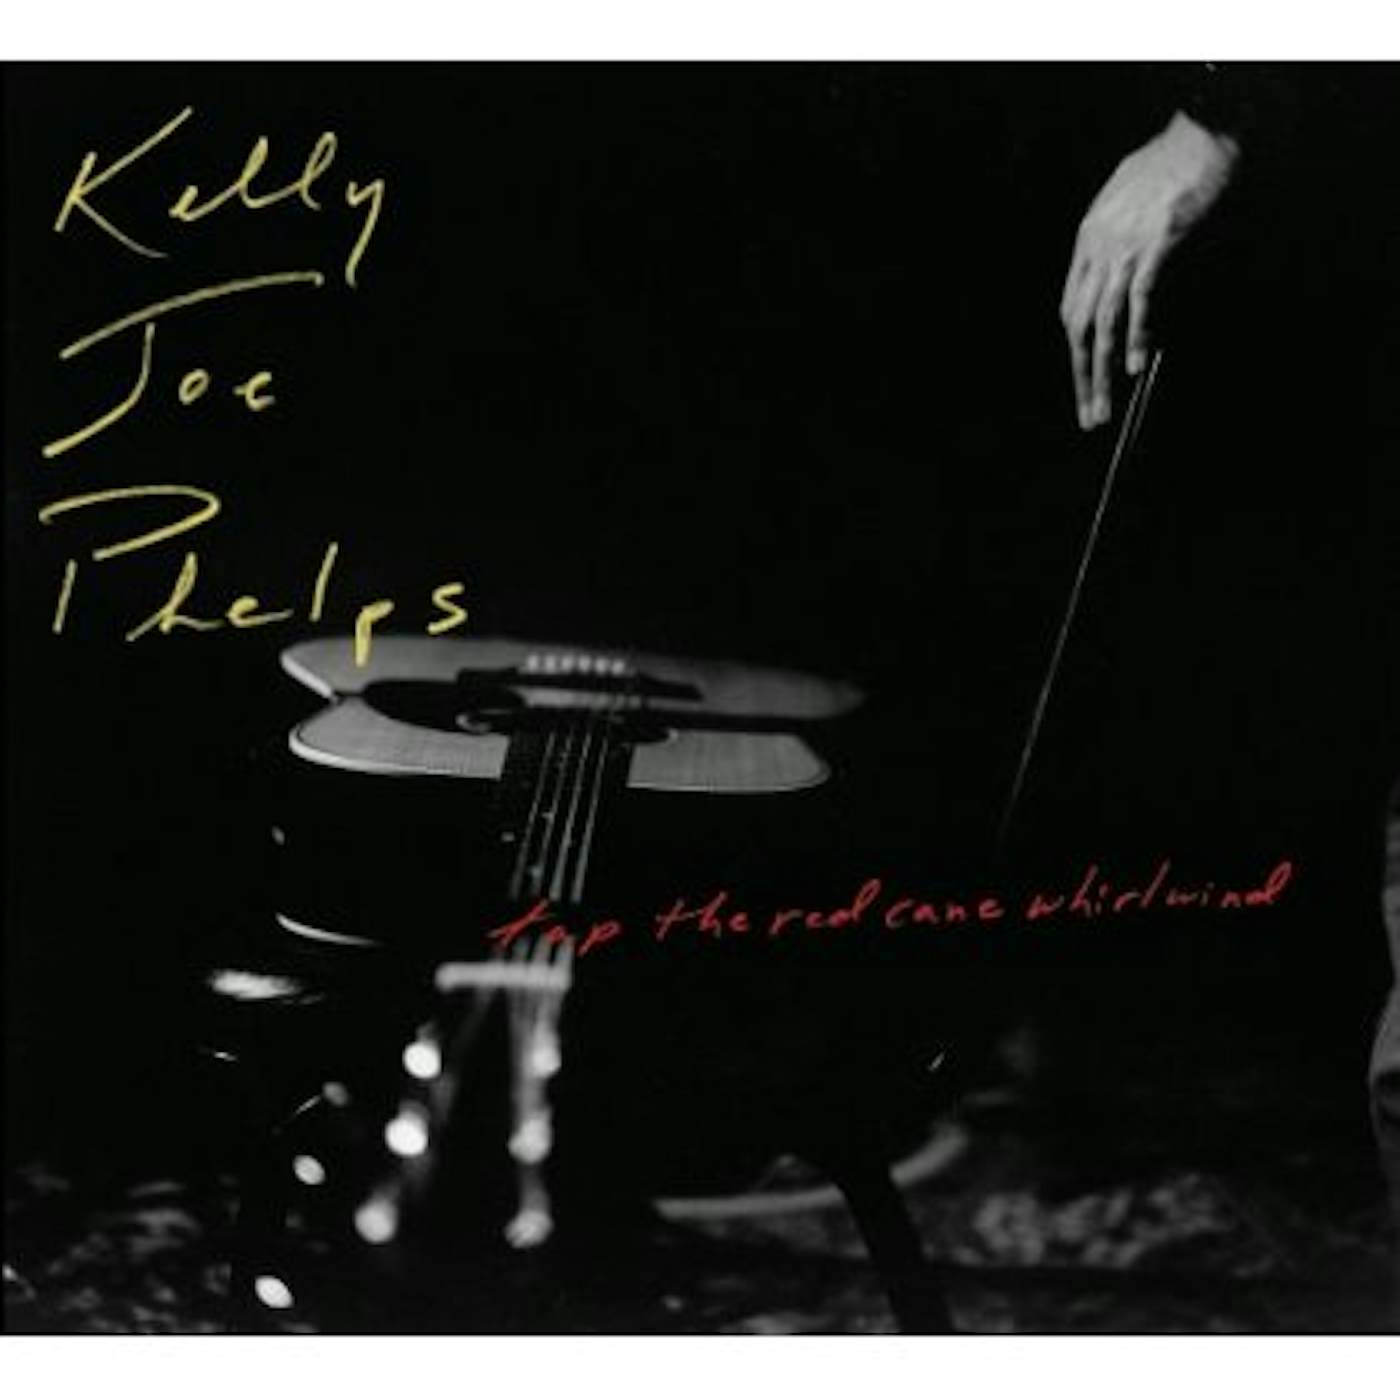 Kelly Joe Phelps TAP THE RED CANE WHIRLWIND CD